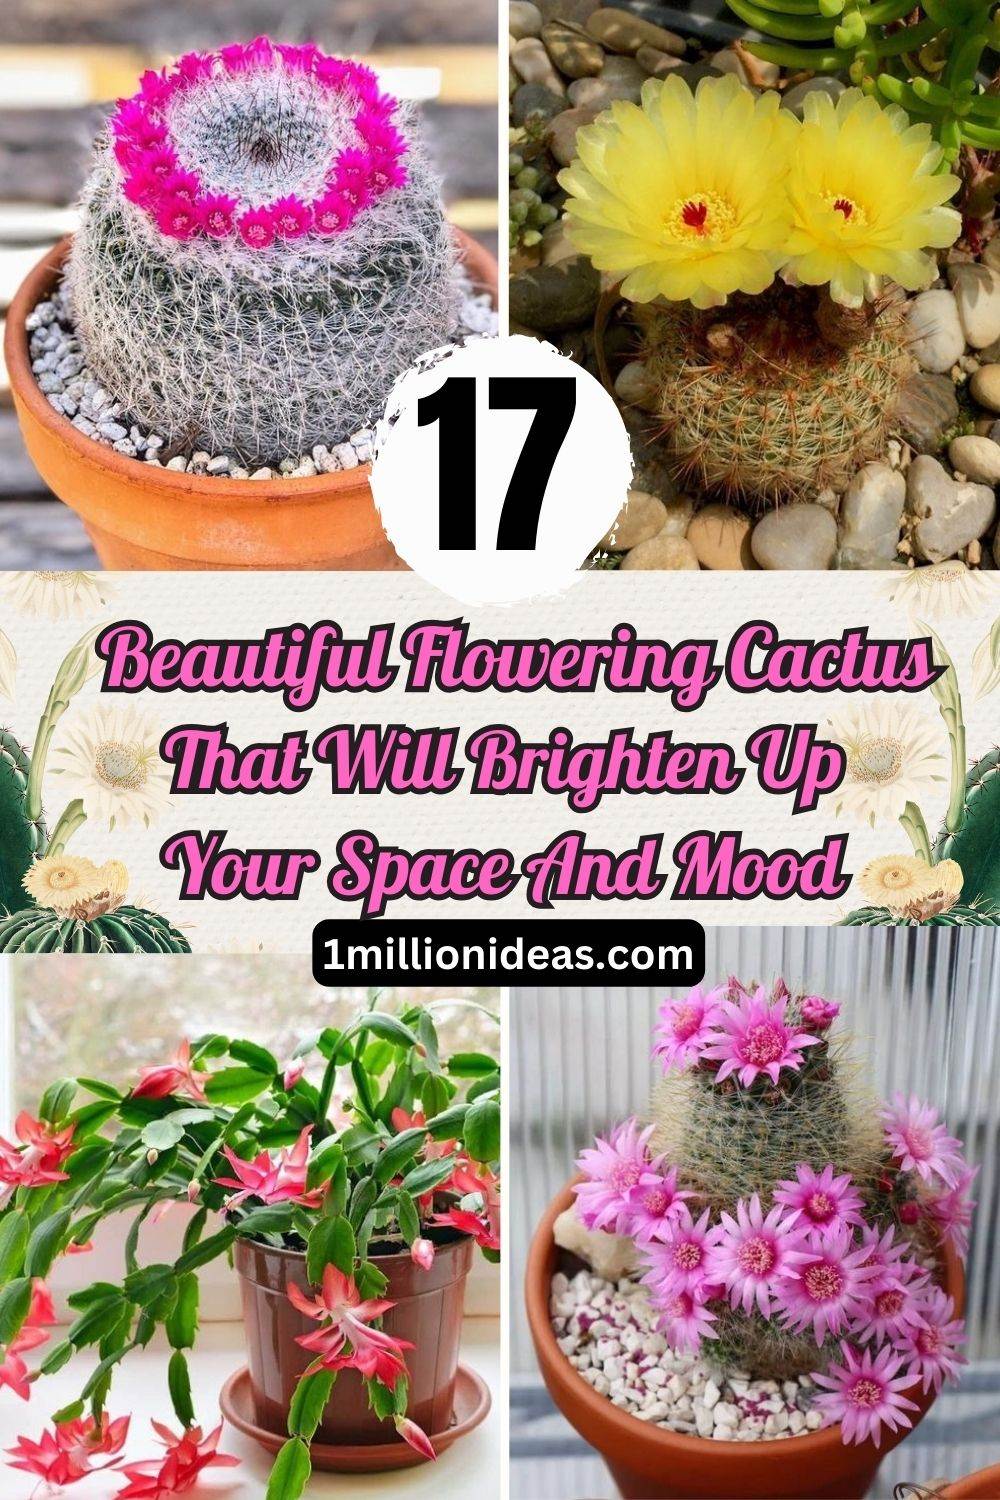 17 Beautiful Flowering Cactus That Will Brighten Up Your Space And Mood - 113